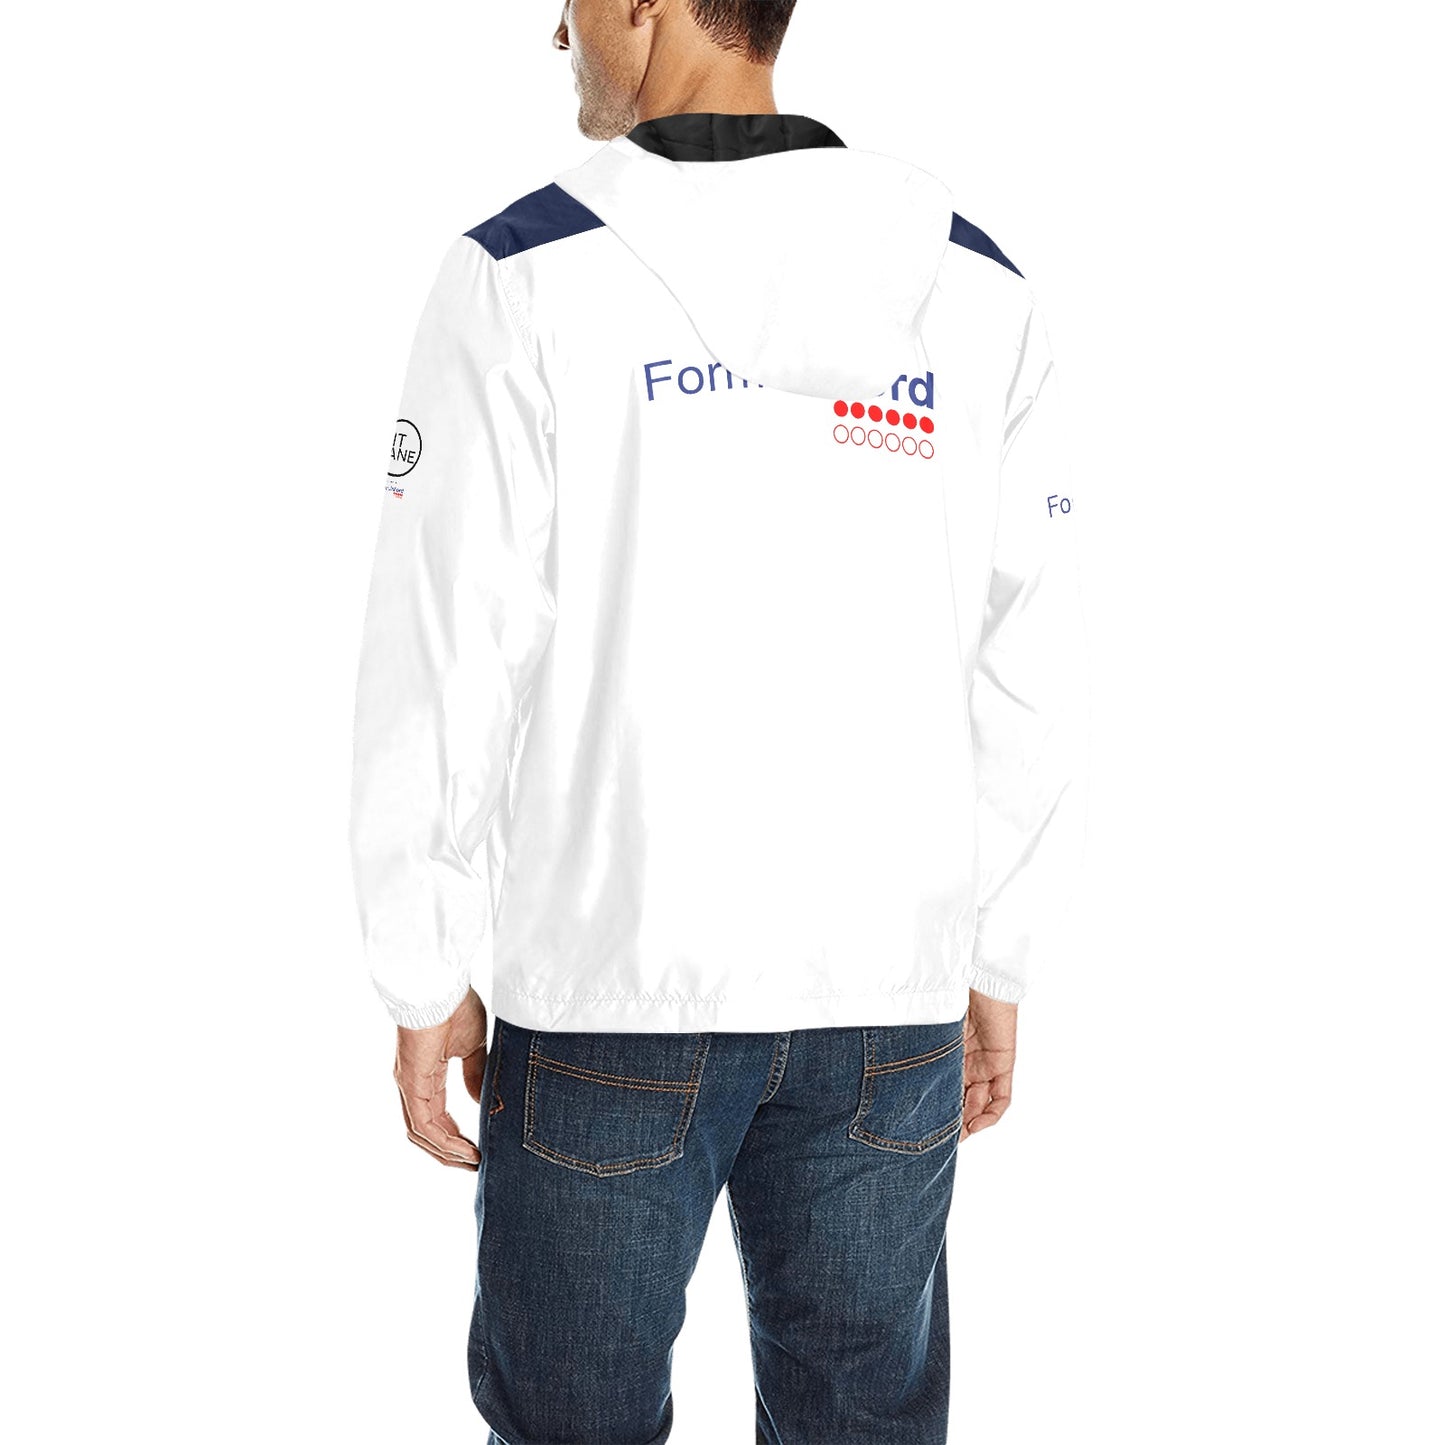 FORMULA FORD Official Waterproof + Quilted windbreaker jacket with hood - circuit white